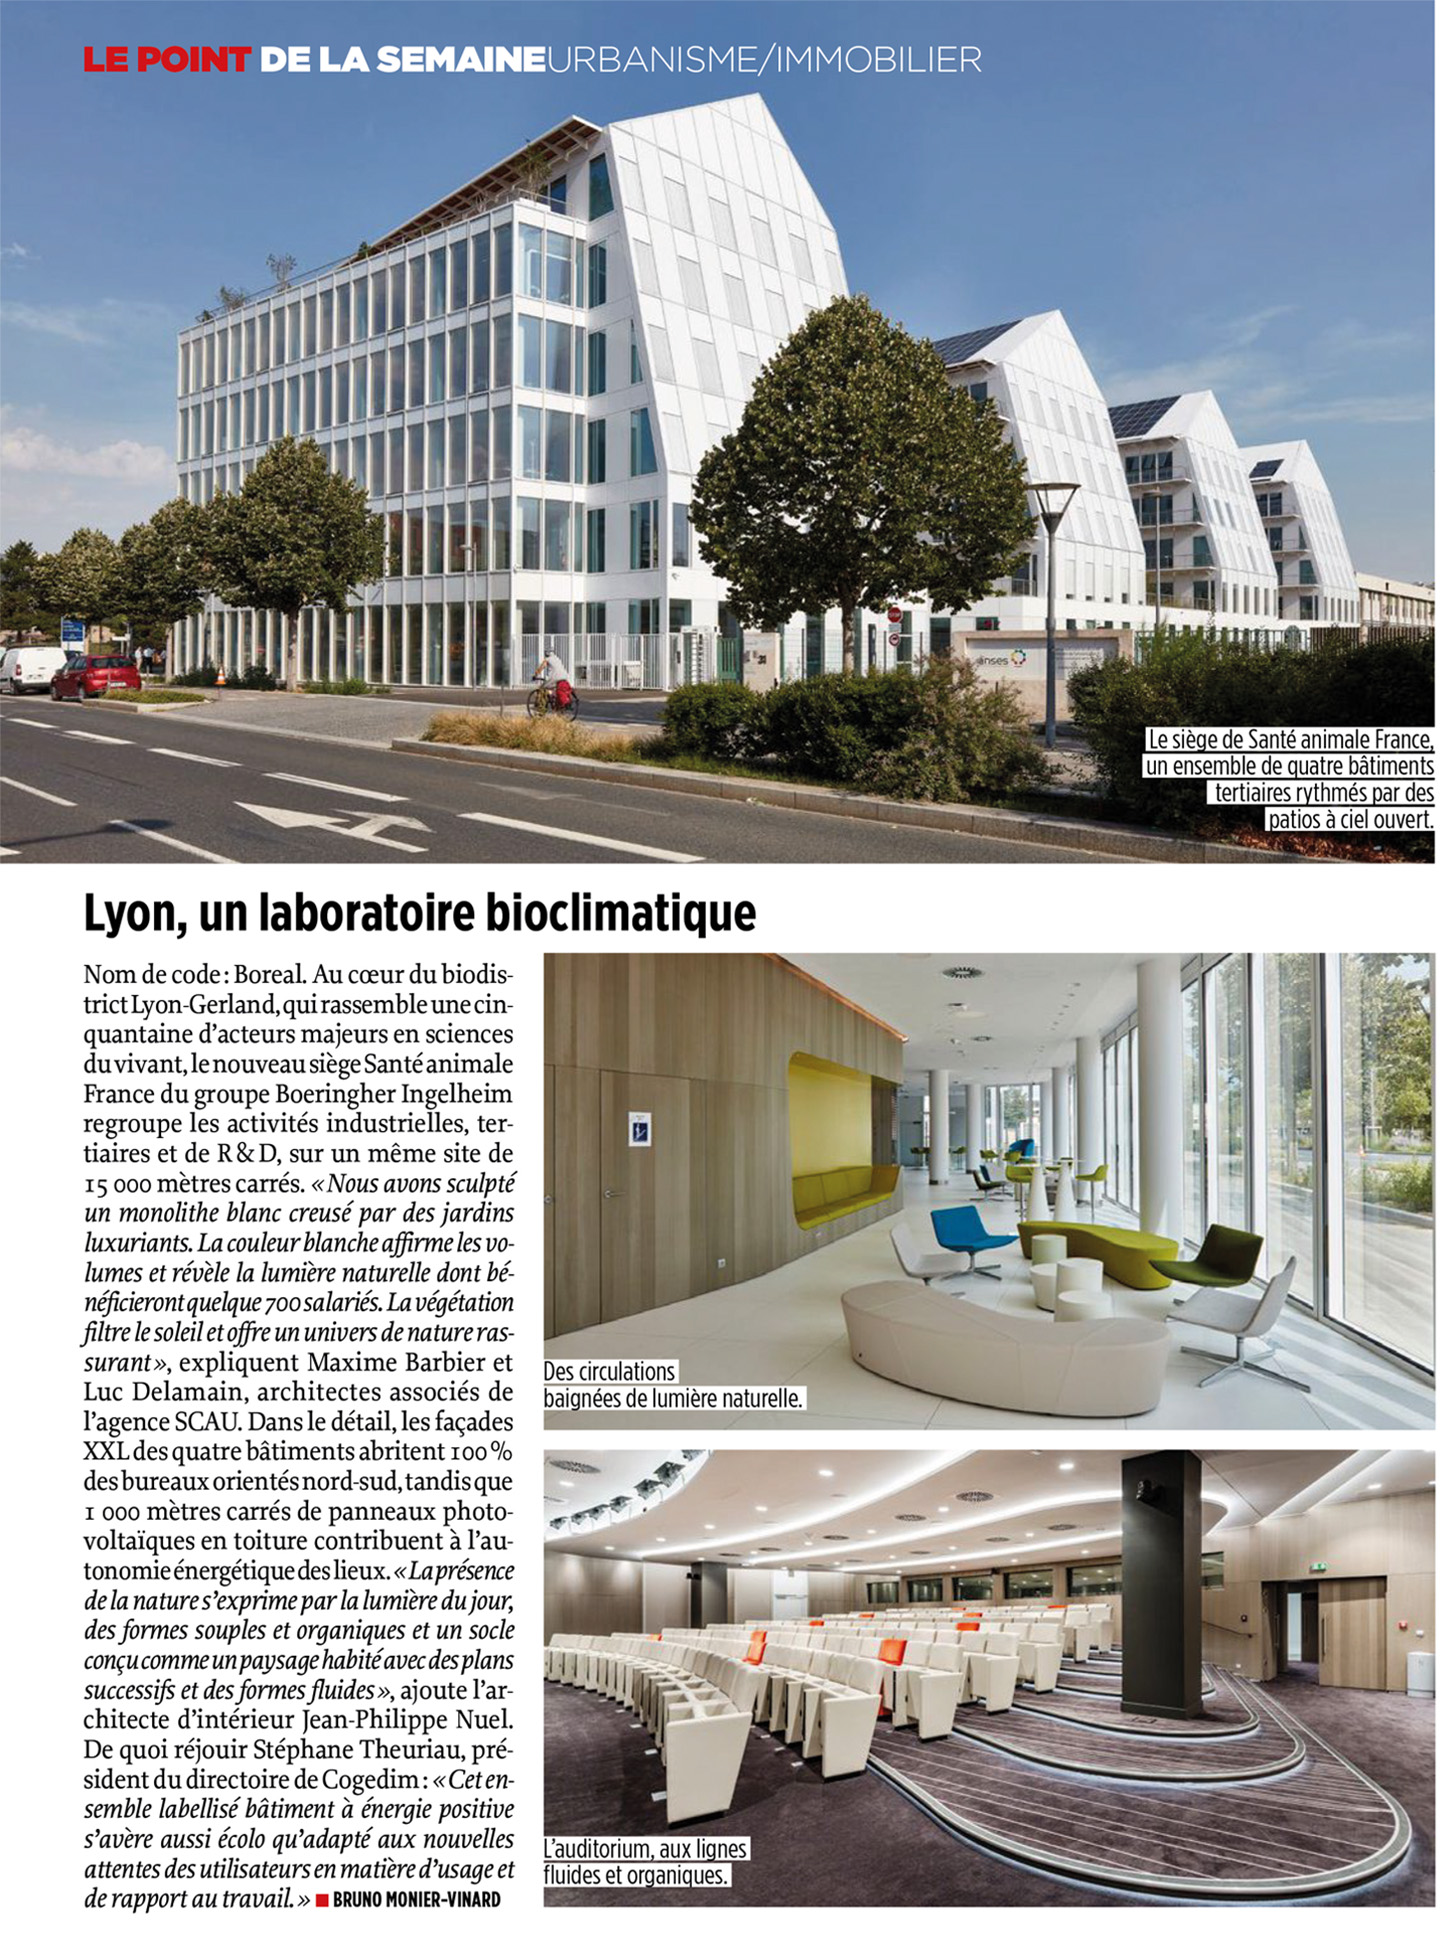 article on the boréal building in Lyon by the studio jean-philippe nuel in the magazine le point